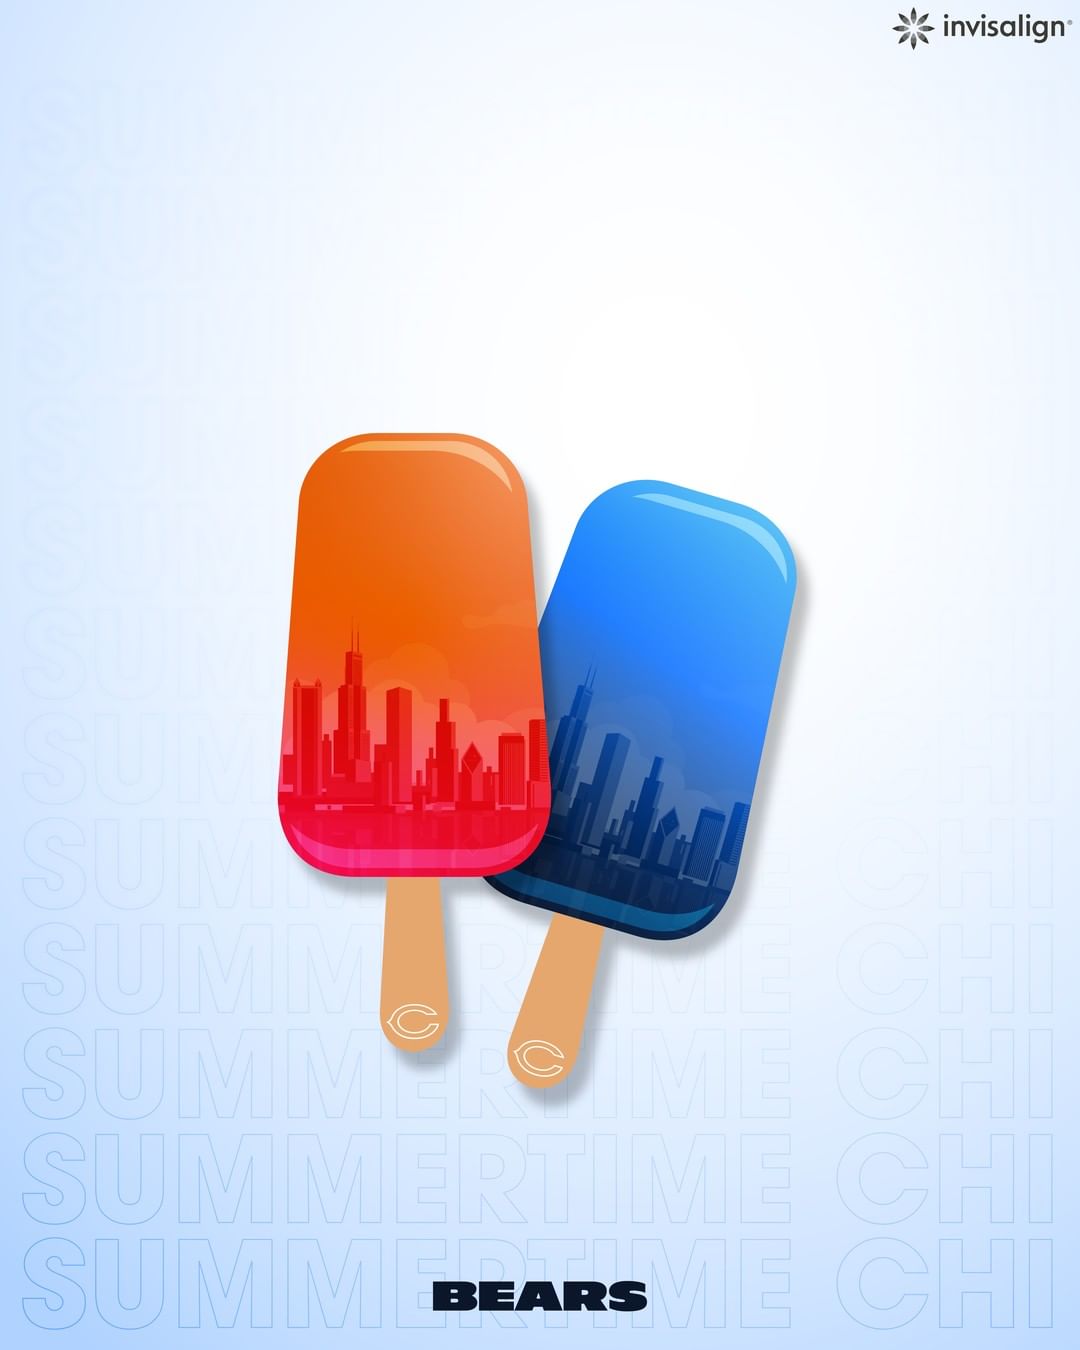 Summertime Chi, ahh  Head to our story for this week's #WallpaperWednesday...